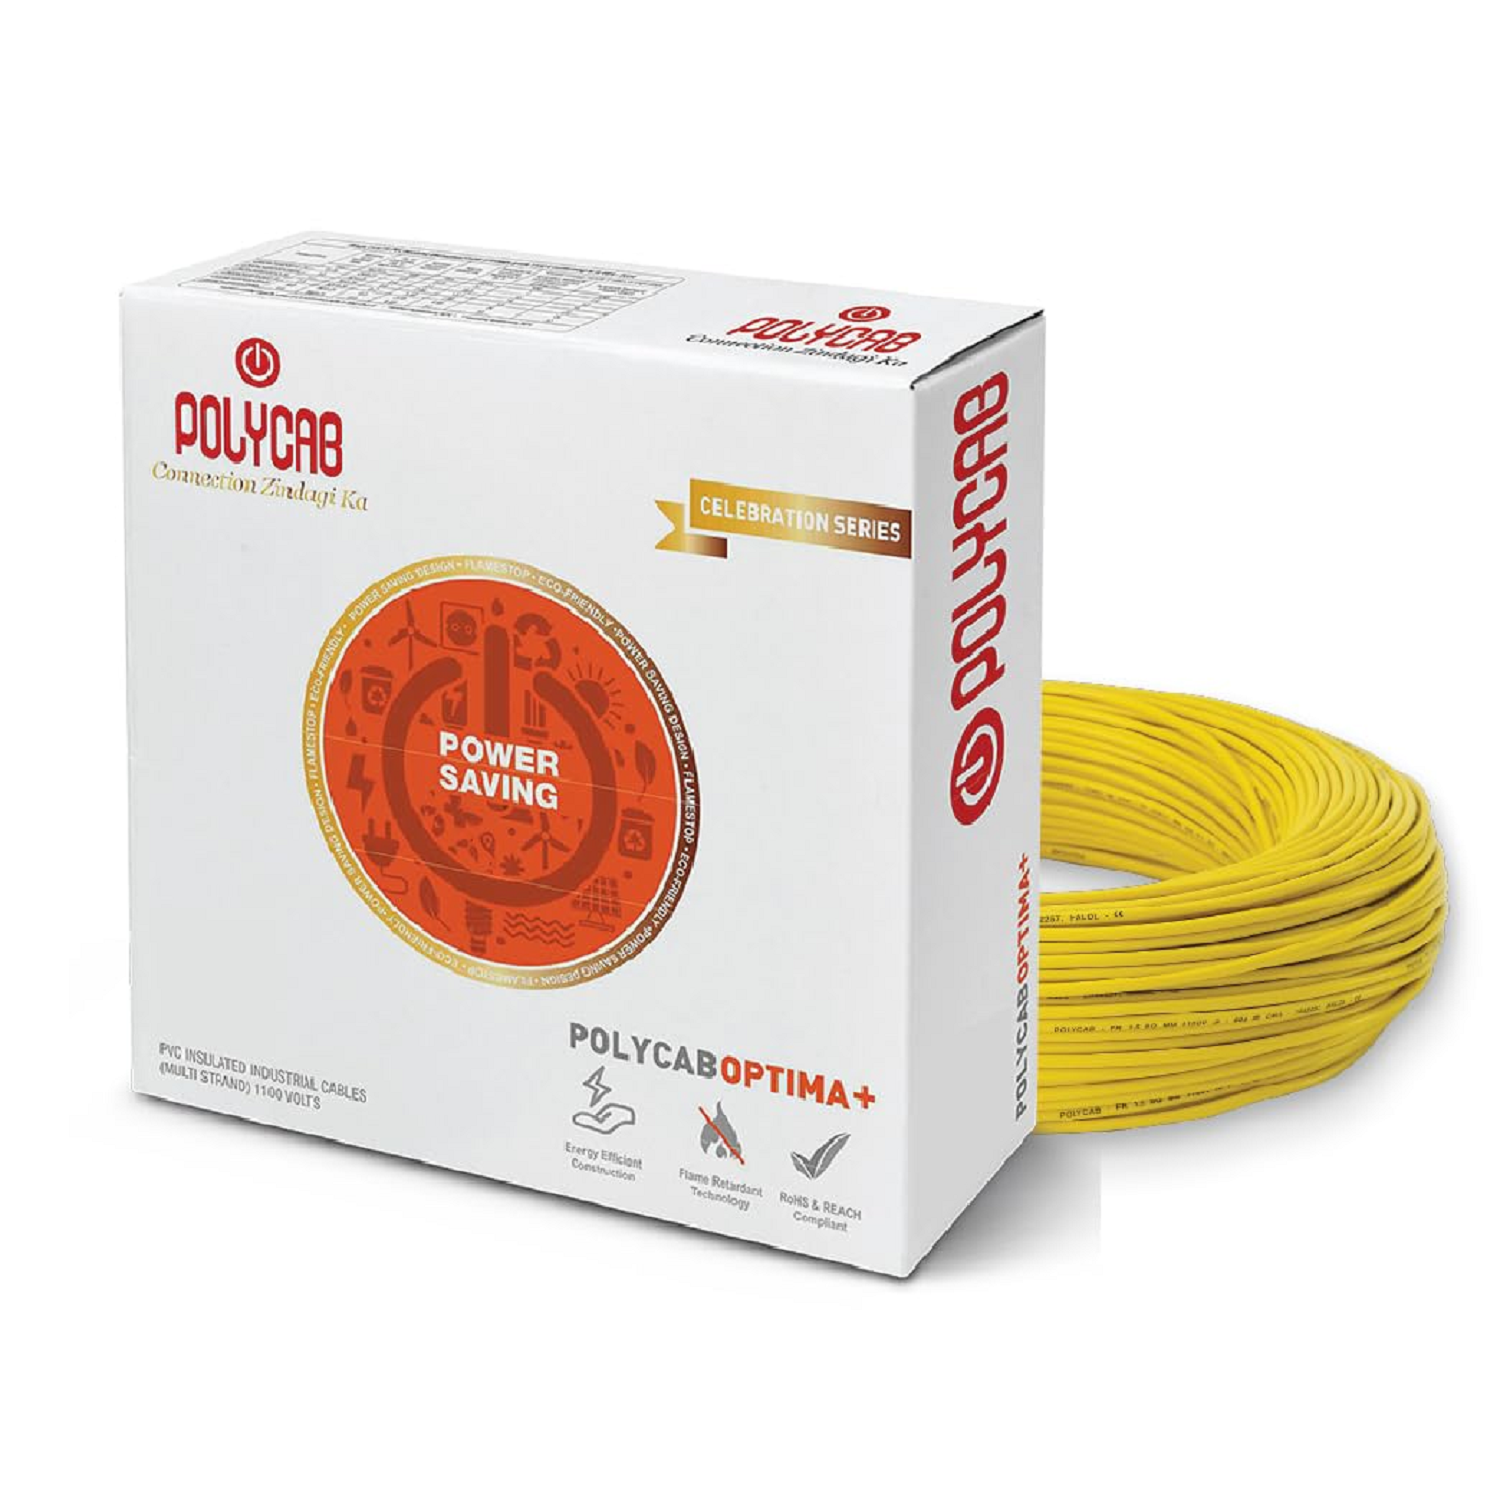 Polycab Optima Plus FR-LF 0.75 SQ-MM, 90 Meters PVC Insulated Copper Wire Single Core (Yellow)